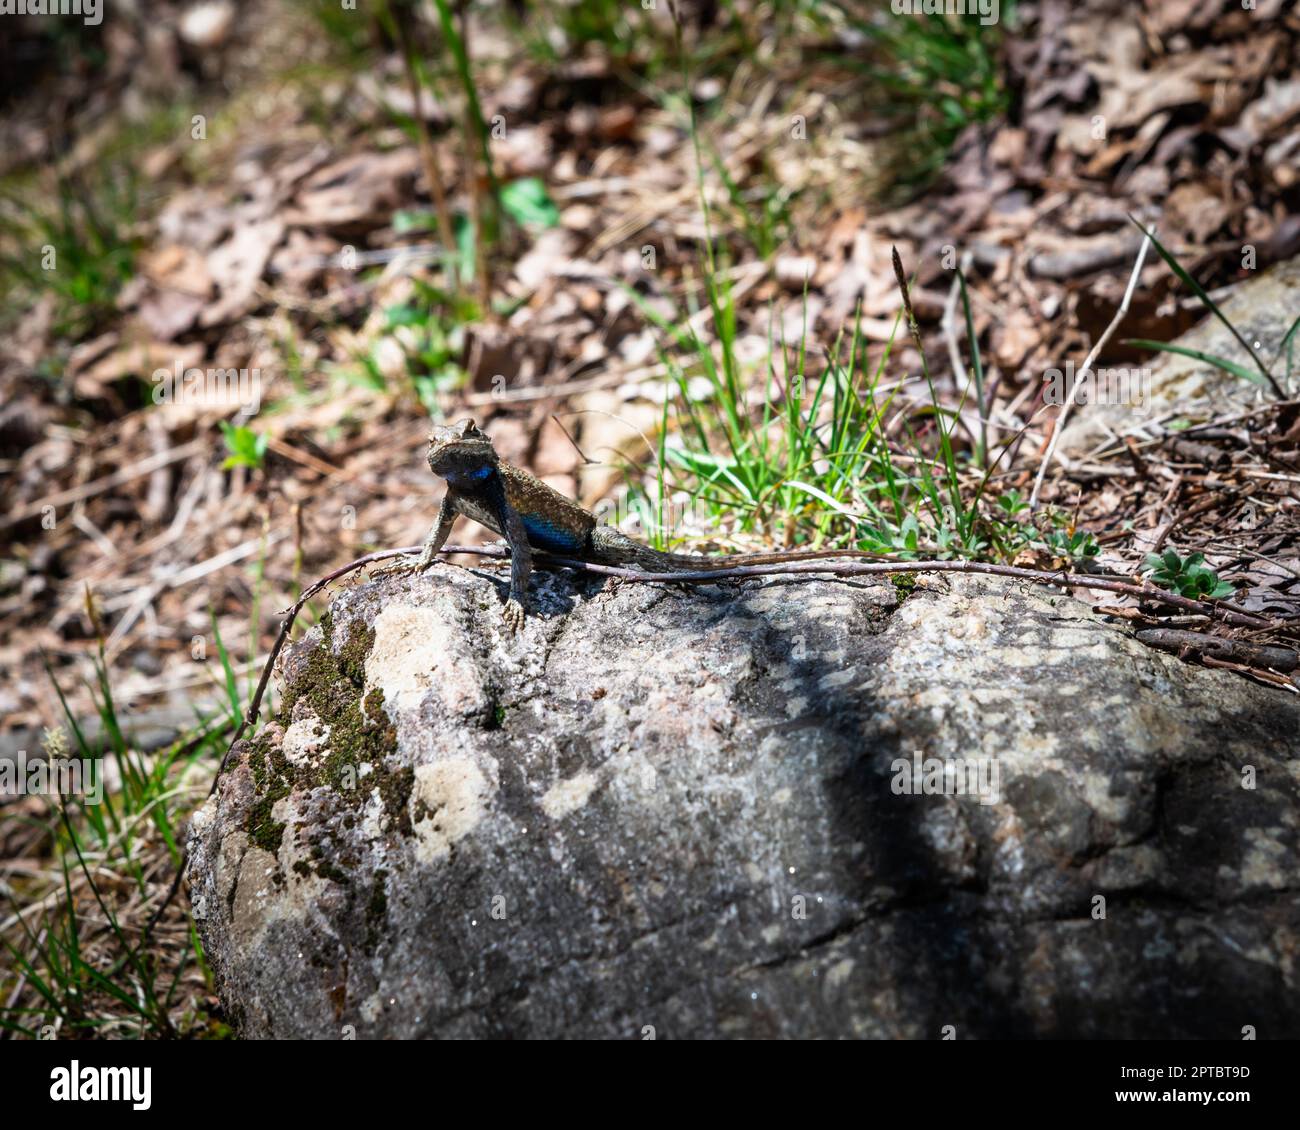 Eastern Fence Lizard with a blue belly sunning itself on a rock Stock Photo